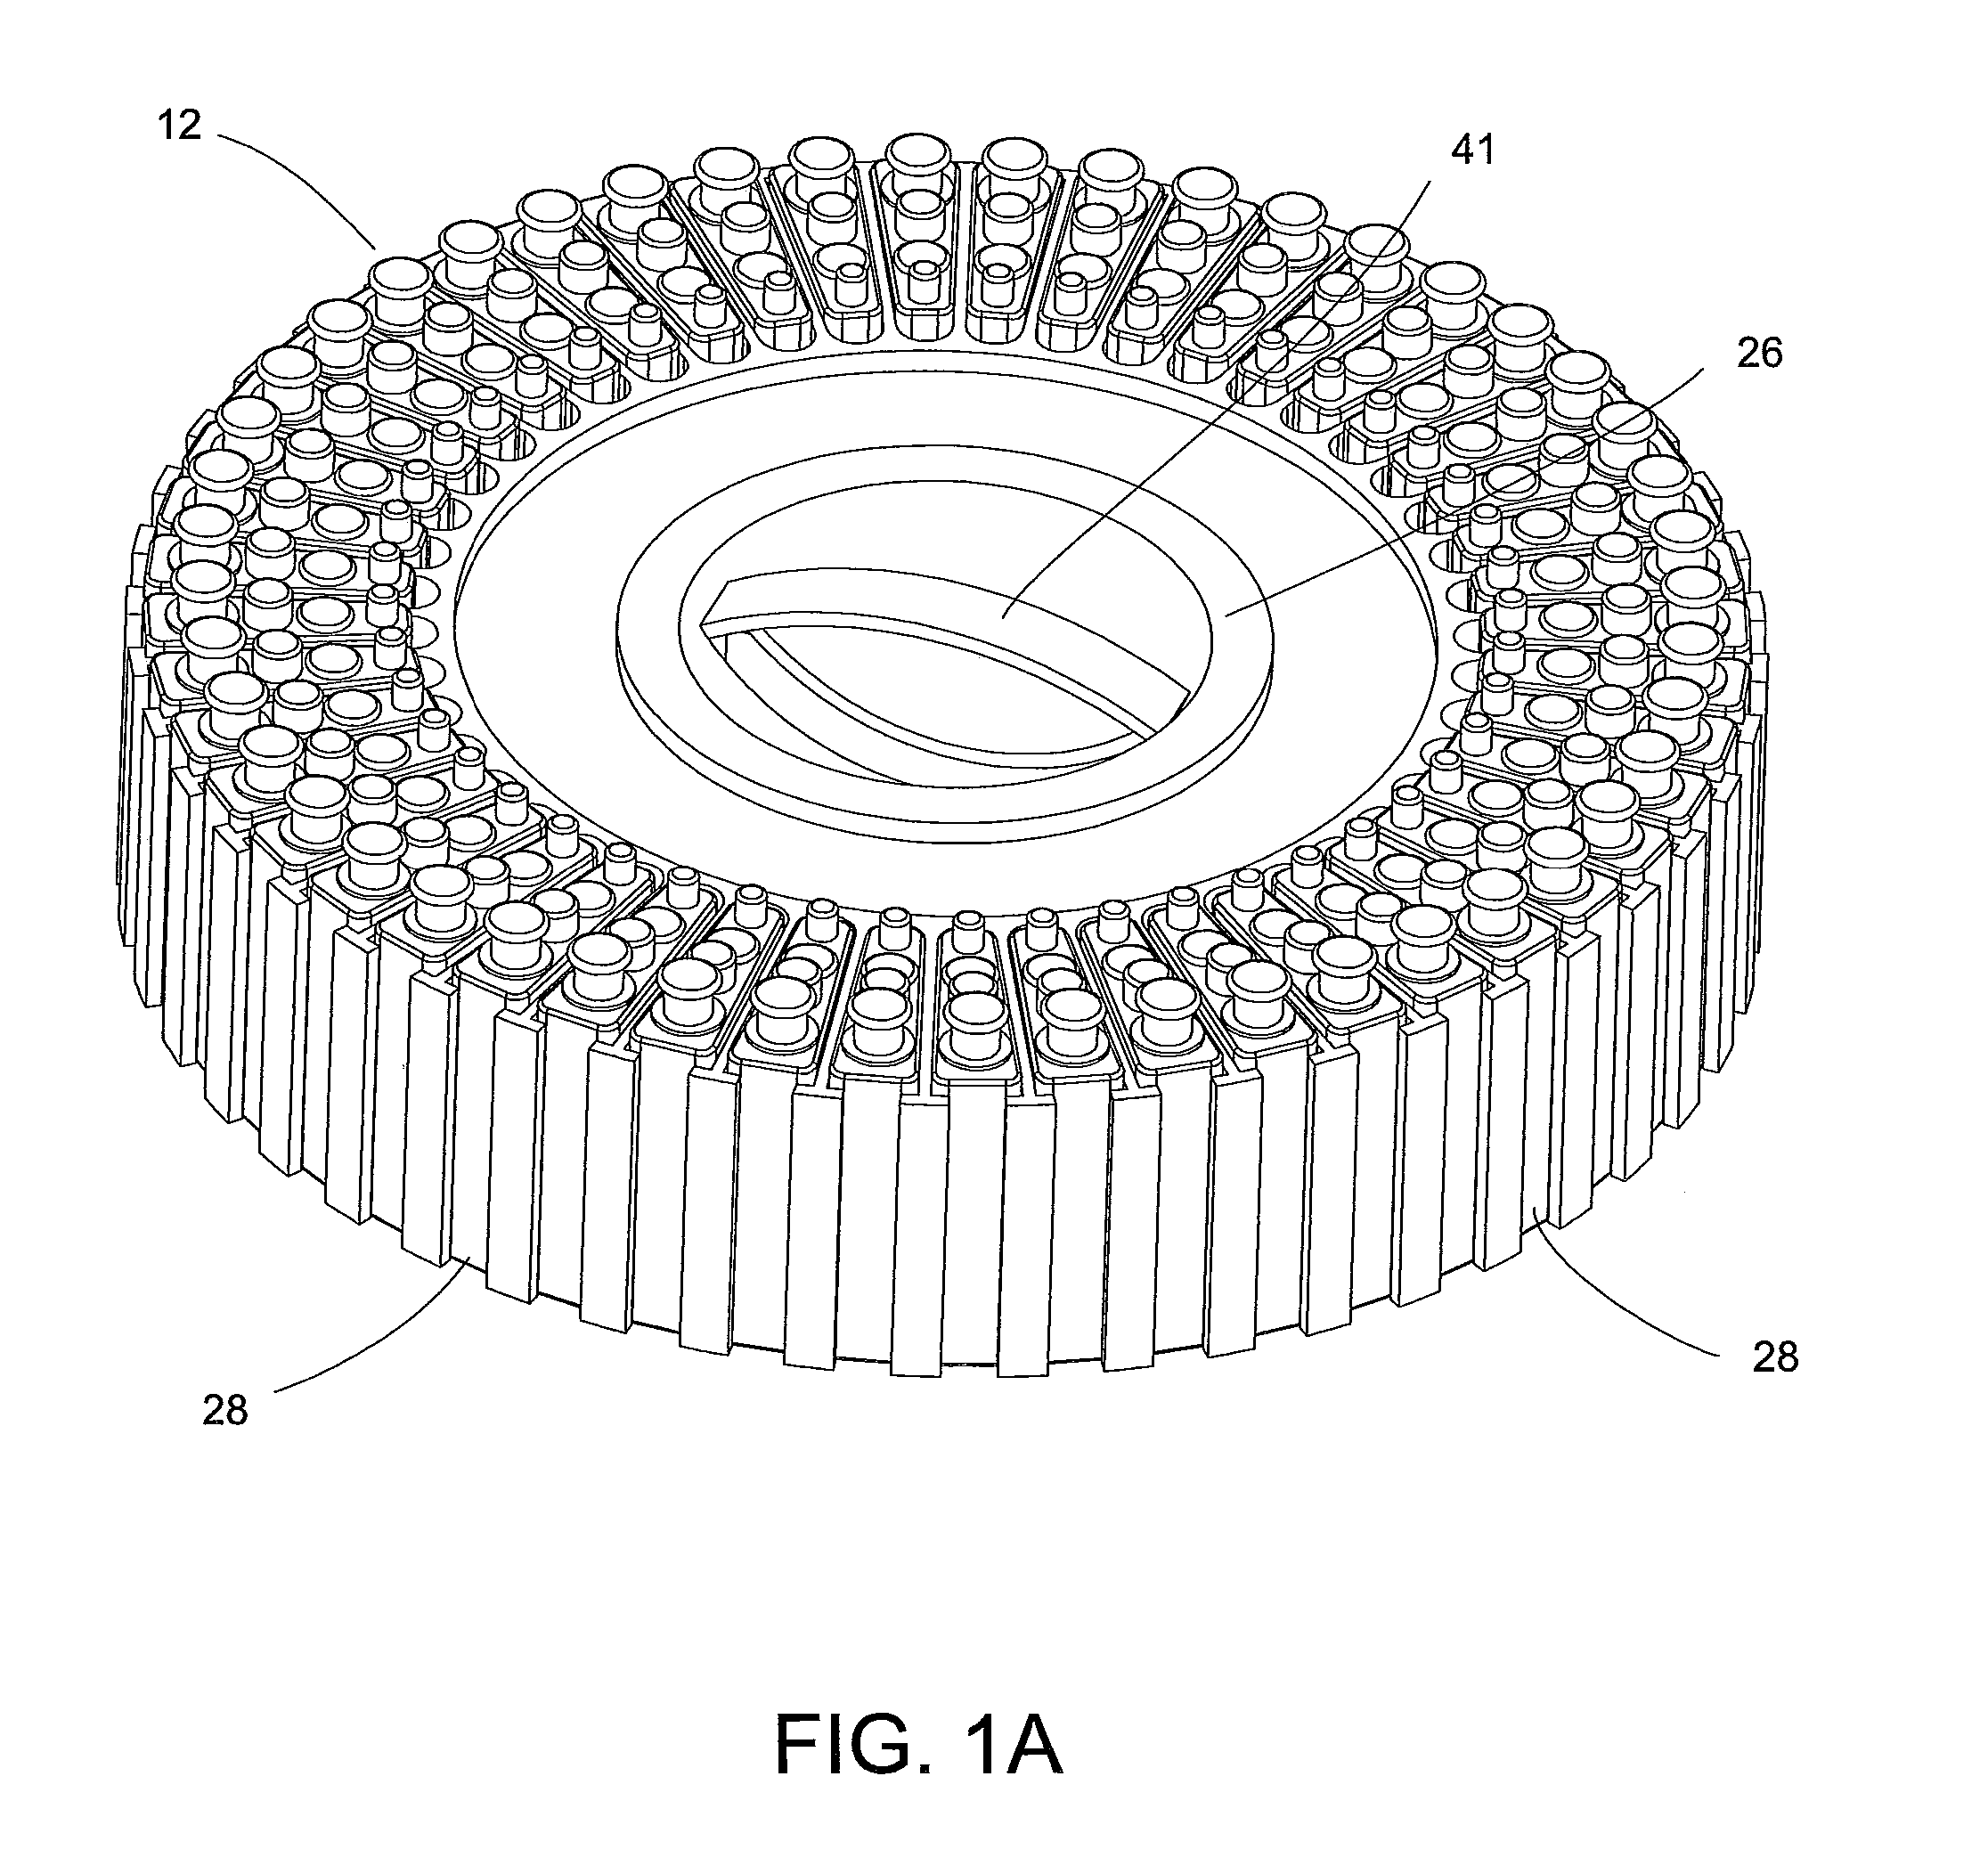 System for Conducting the Identification of Bacteria in Biological Samples